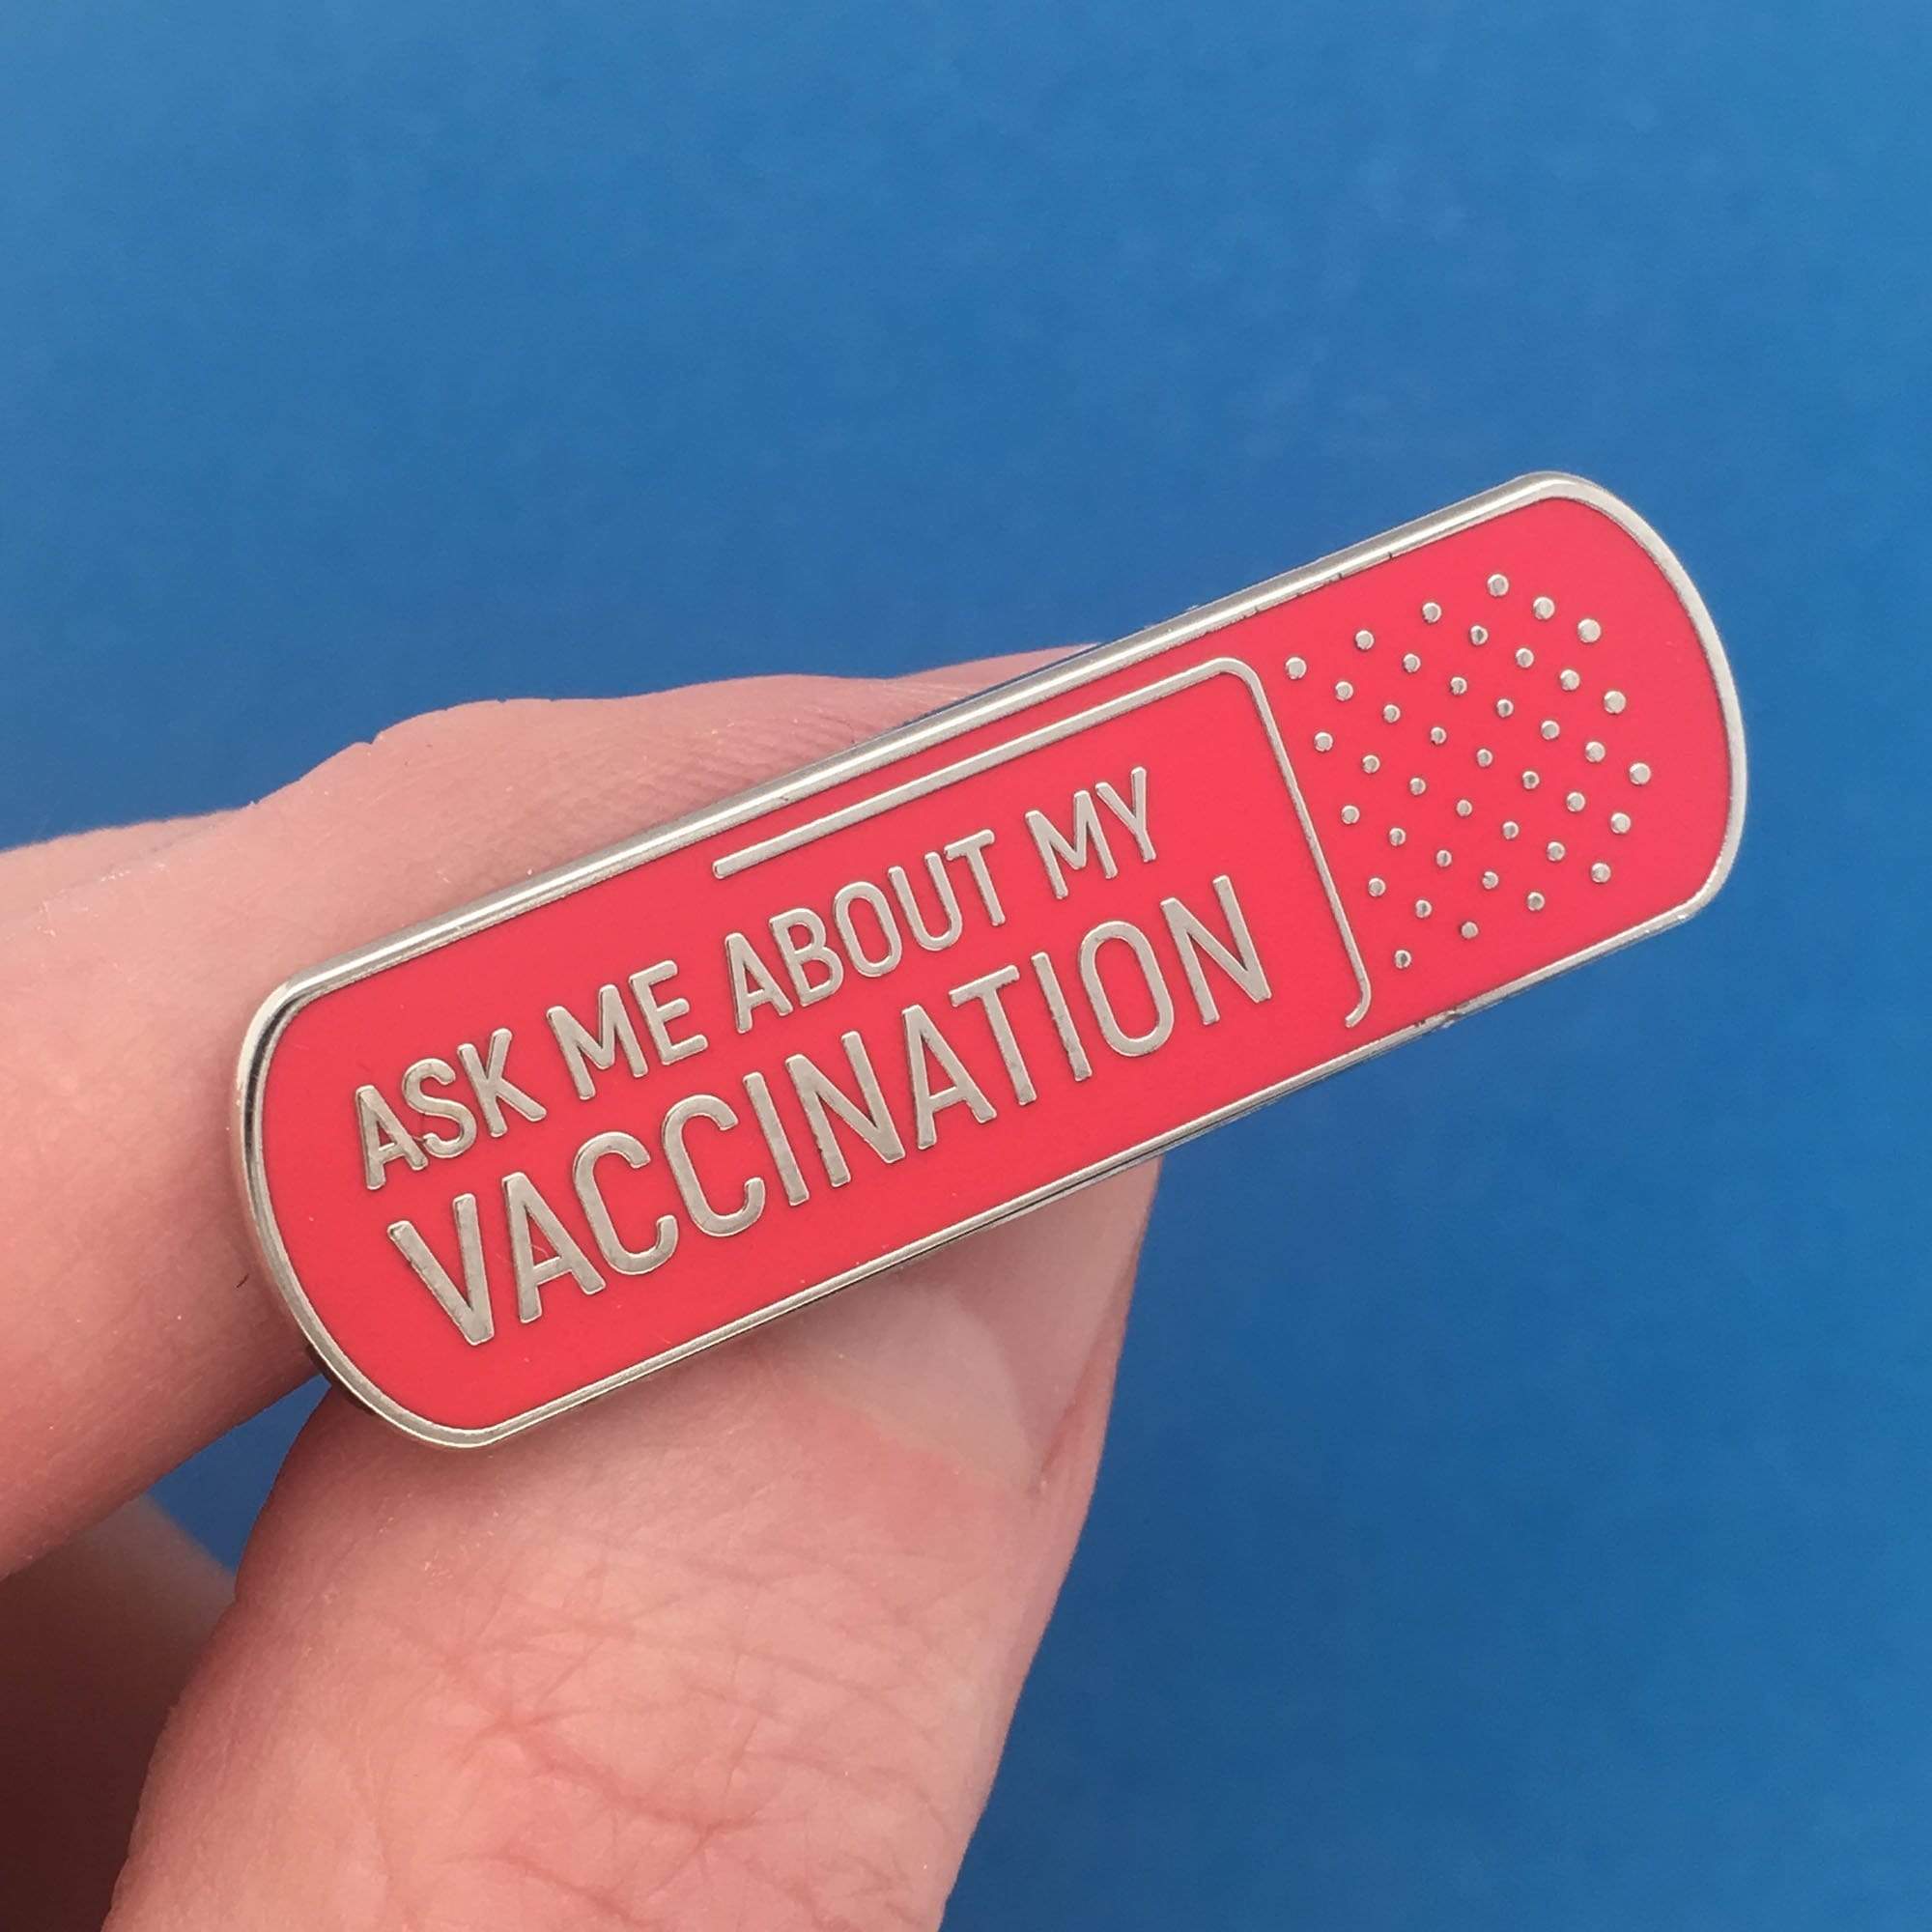 Ask me about my vaccination pin